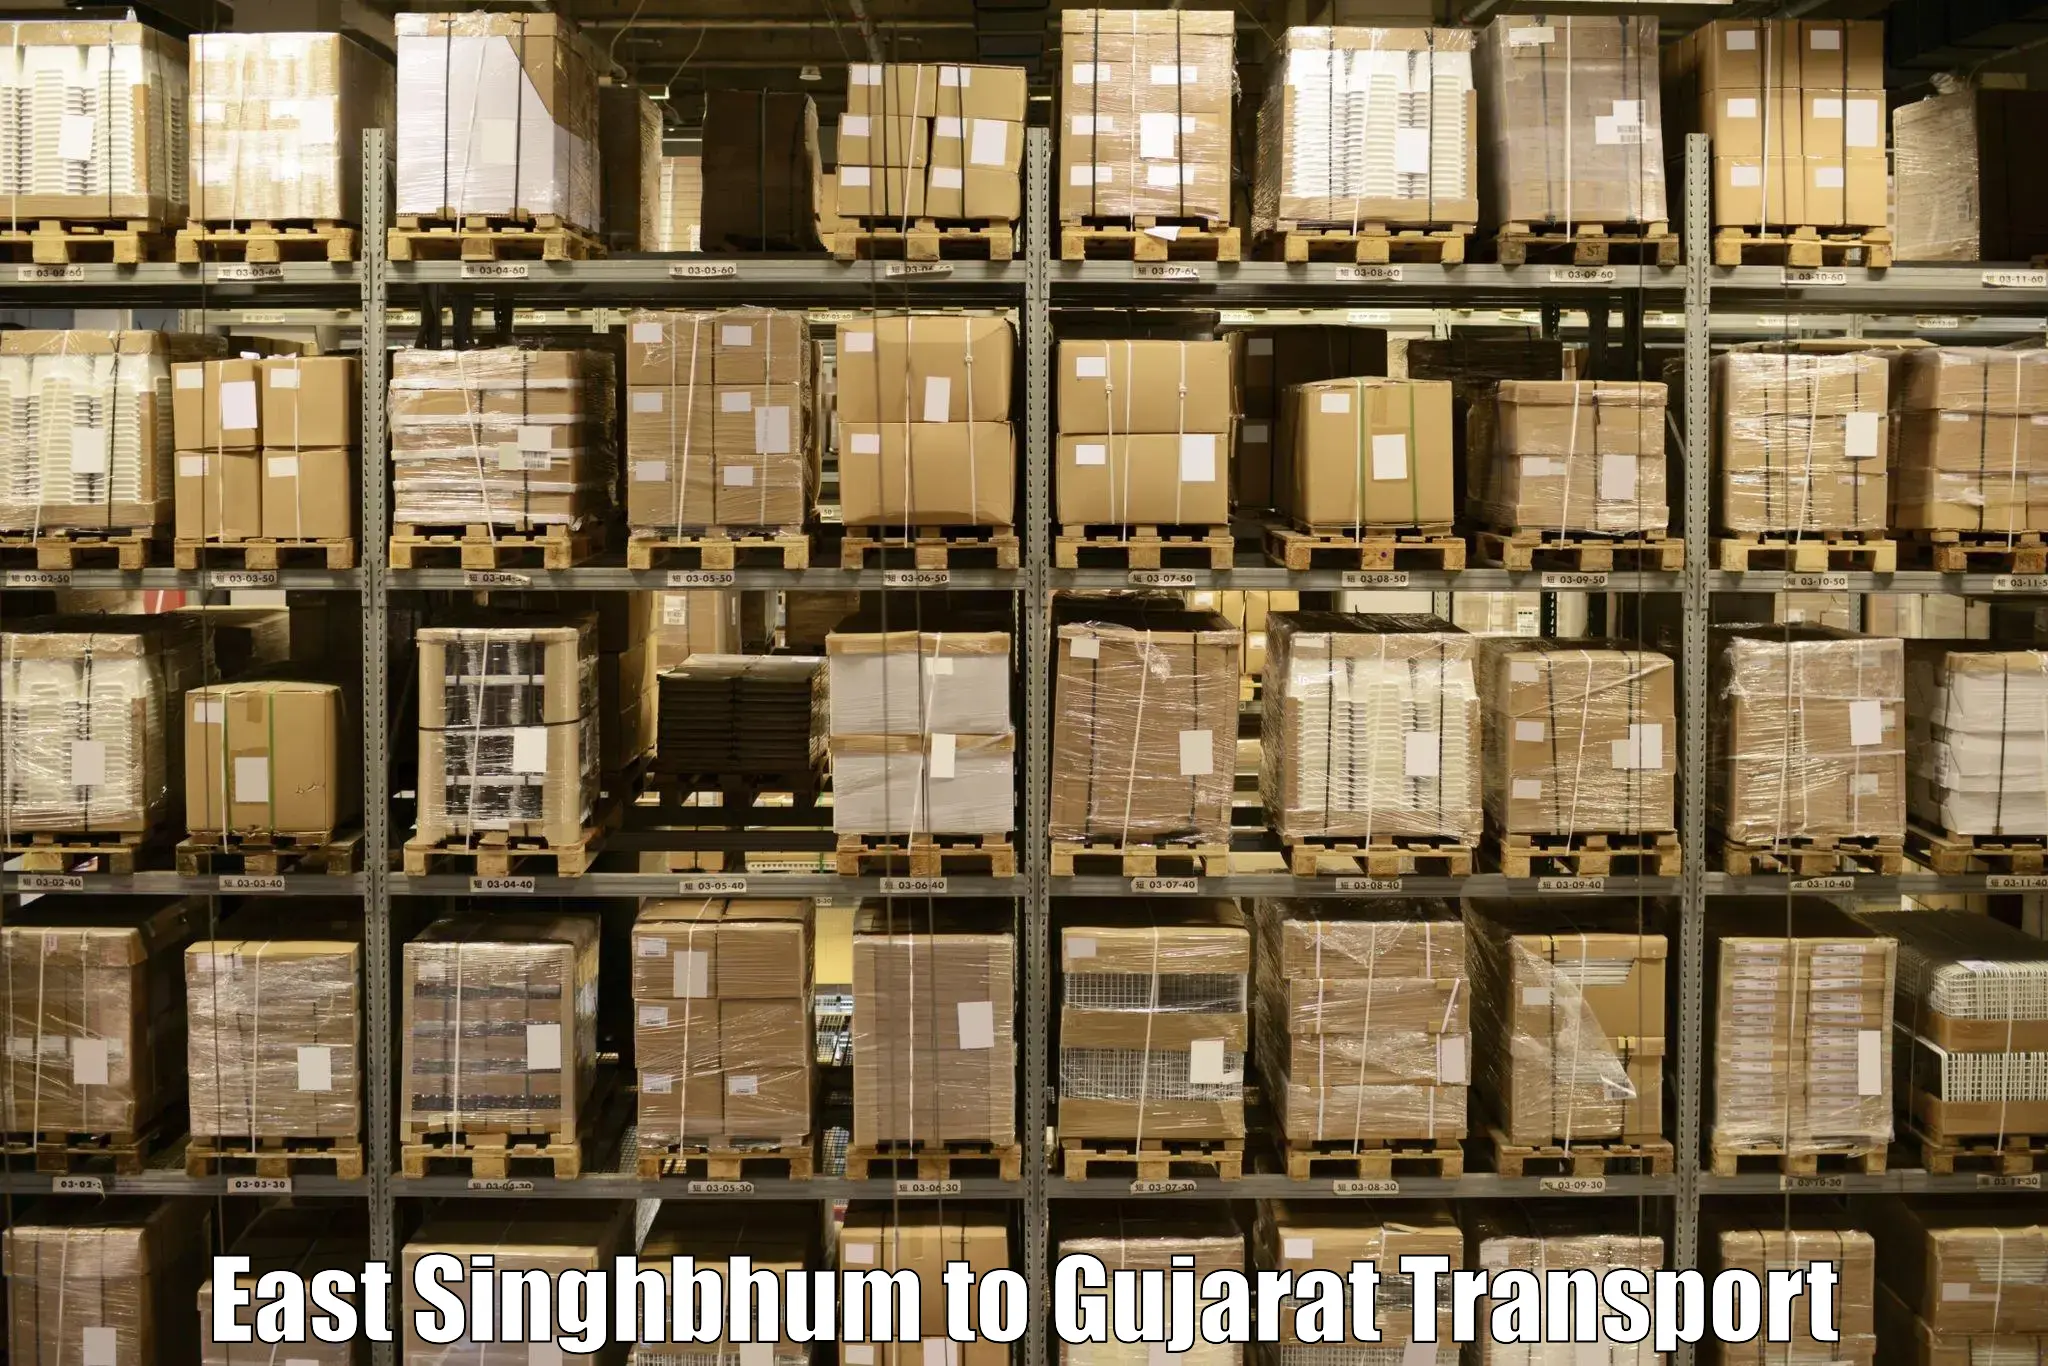 Daily parcel service transport East Singhbhum to Halol